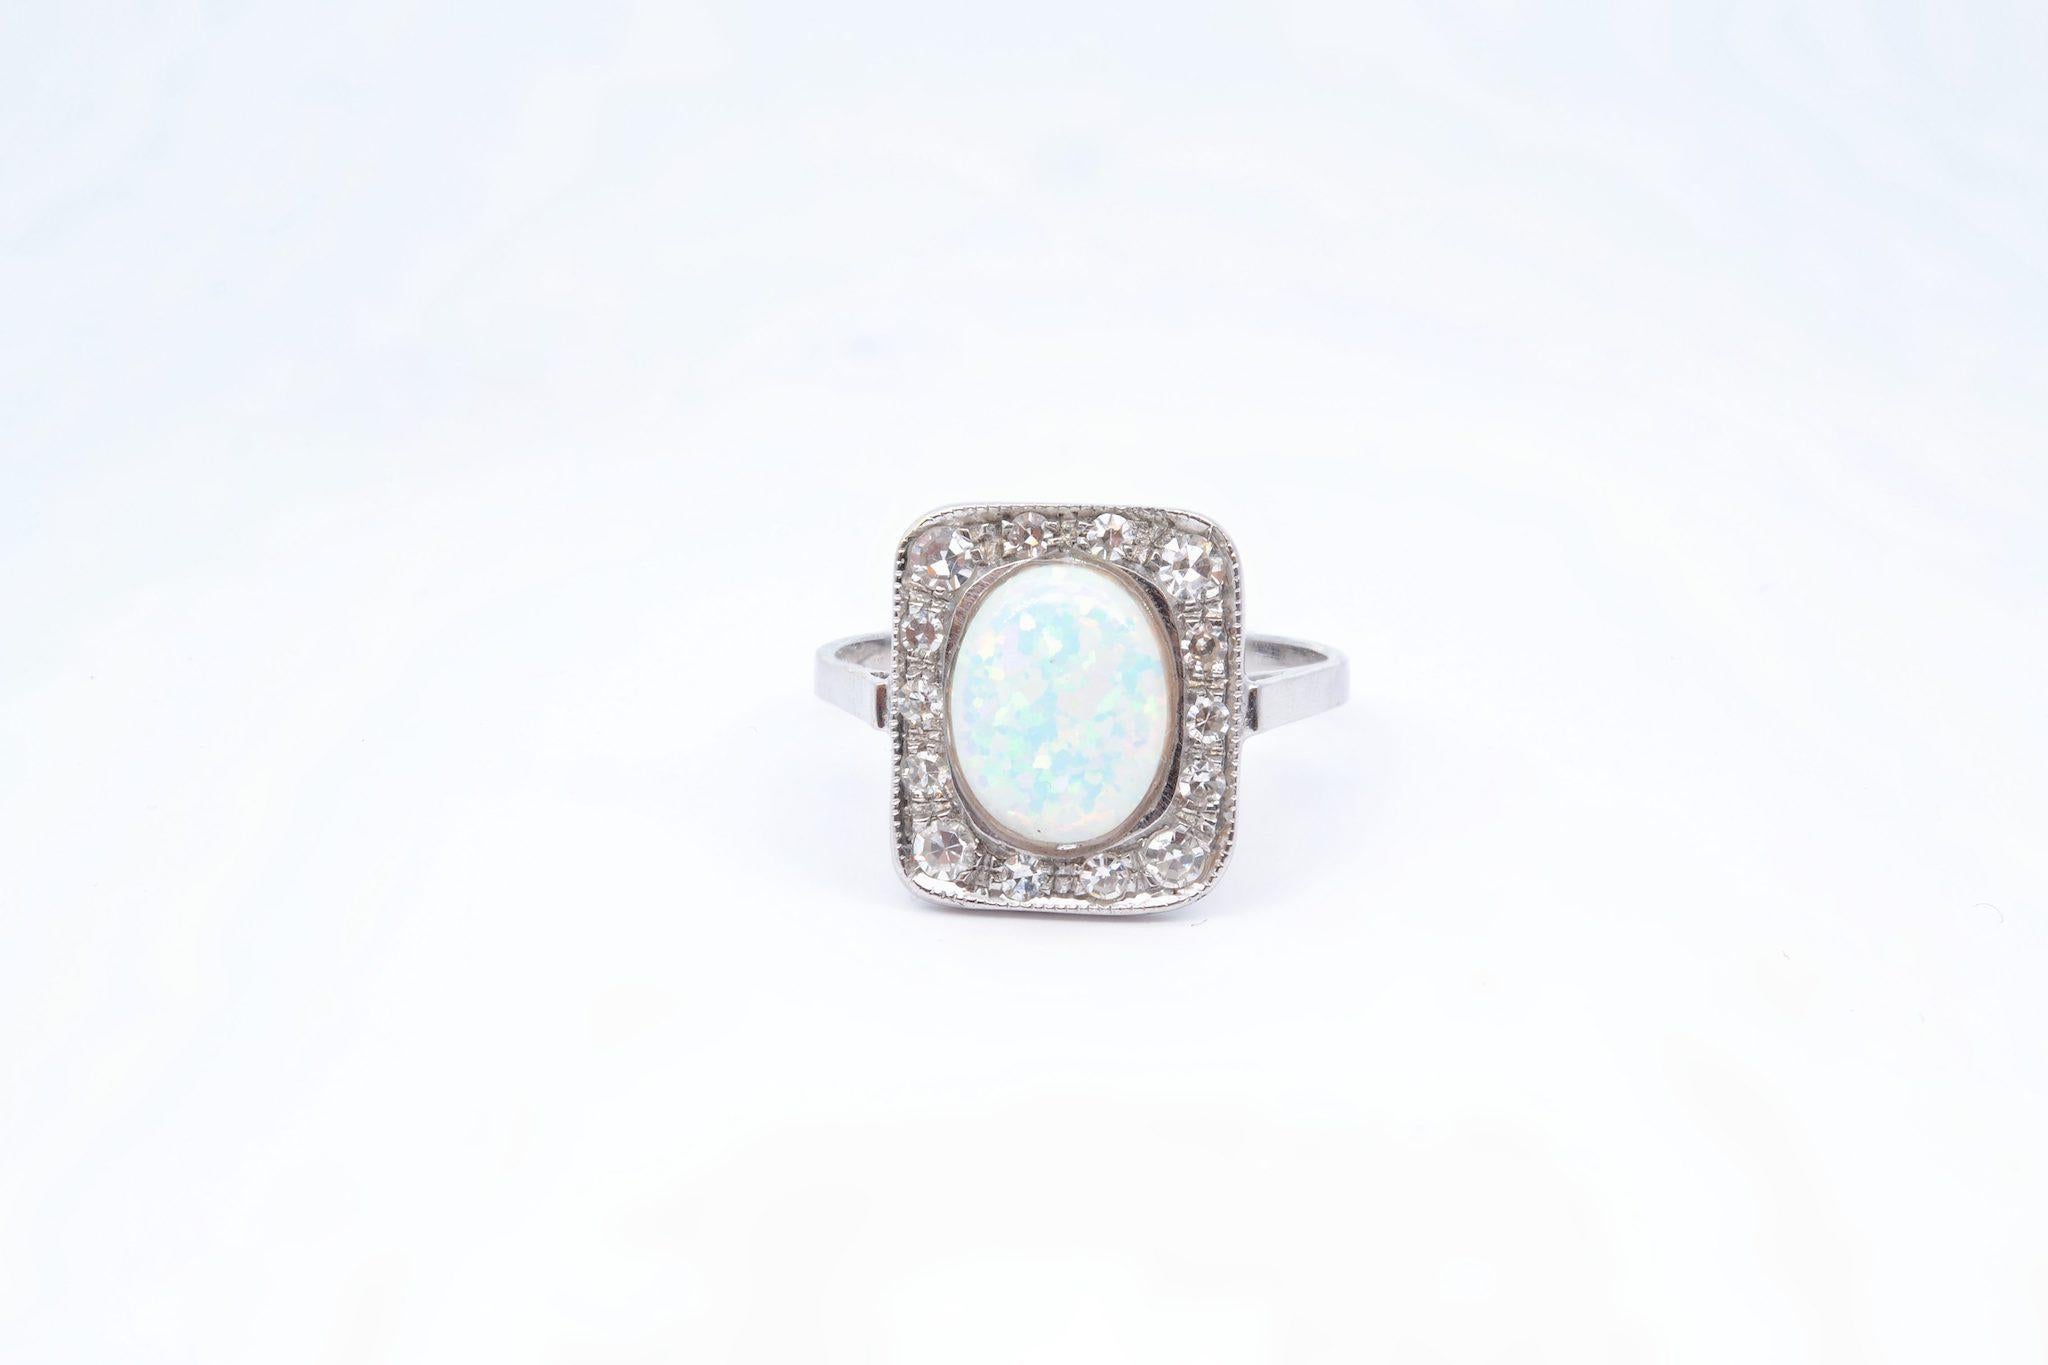 Stones: 1 opal of 1.60 cts and 14 diamonds 8X8: 0.36ct
Material: 18k gold
Dimensions: 1.3cm x 1.1cm
Weight: 2.7g
Period: 1970
Size: 53 (free sizing)
Certificate
Ref. : 25111